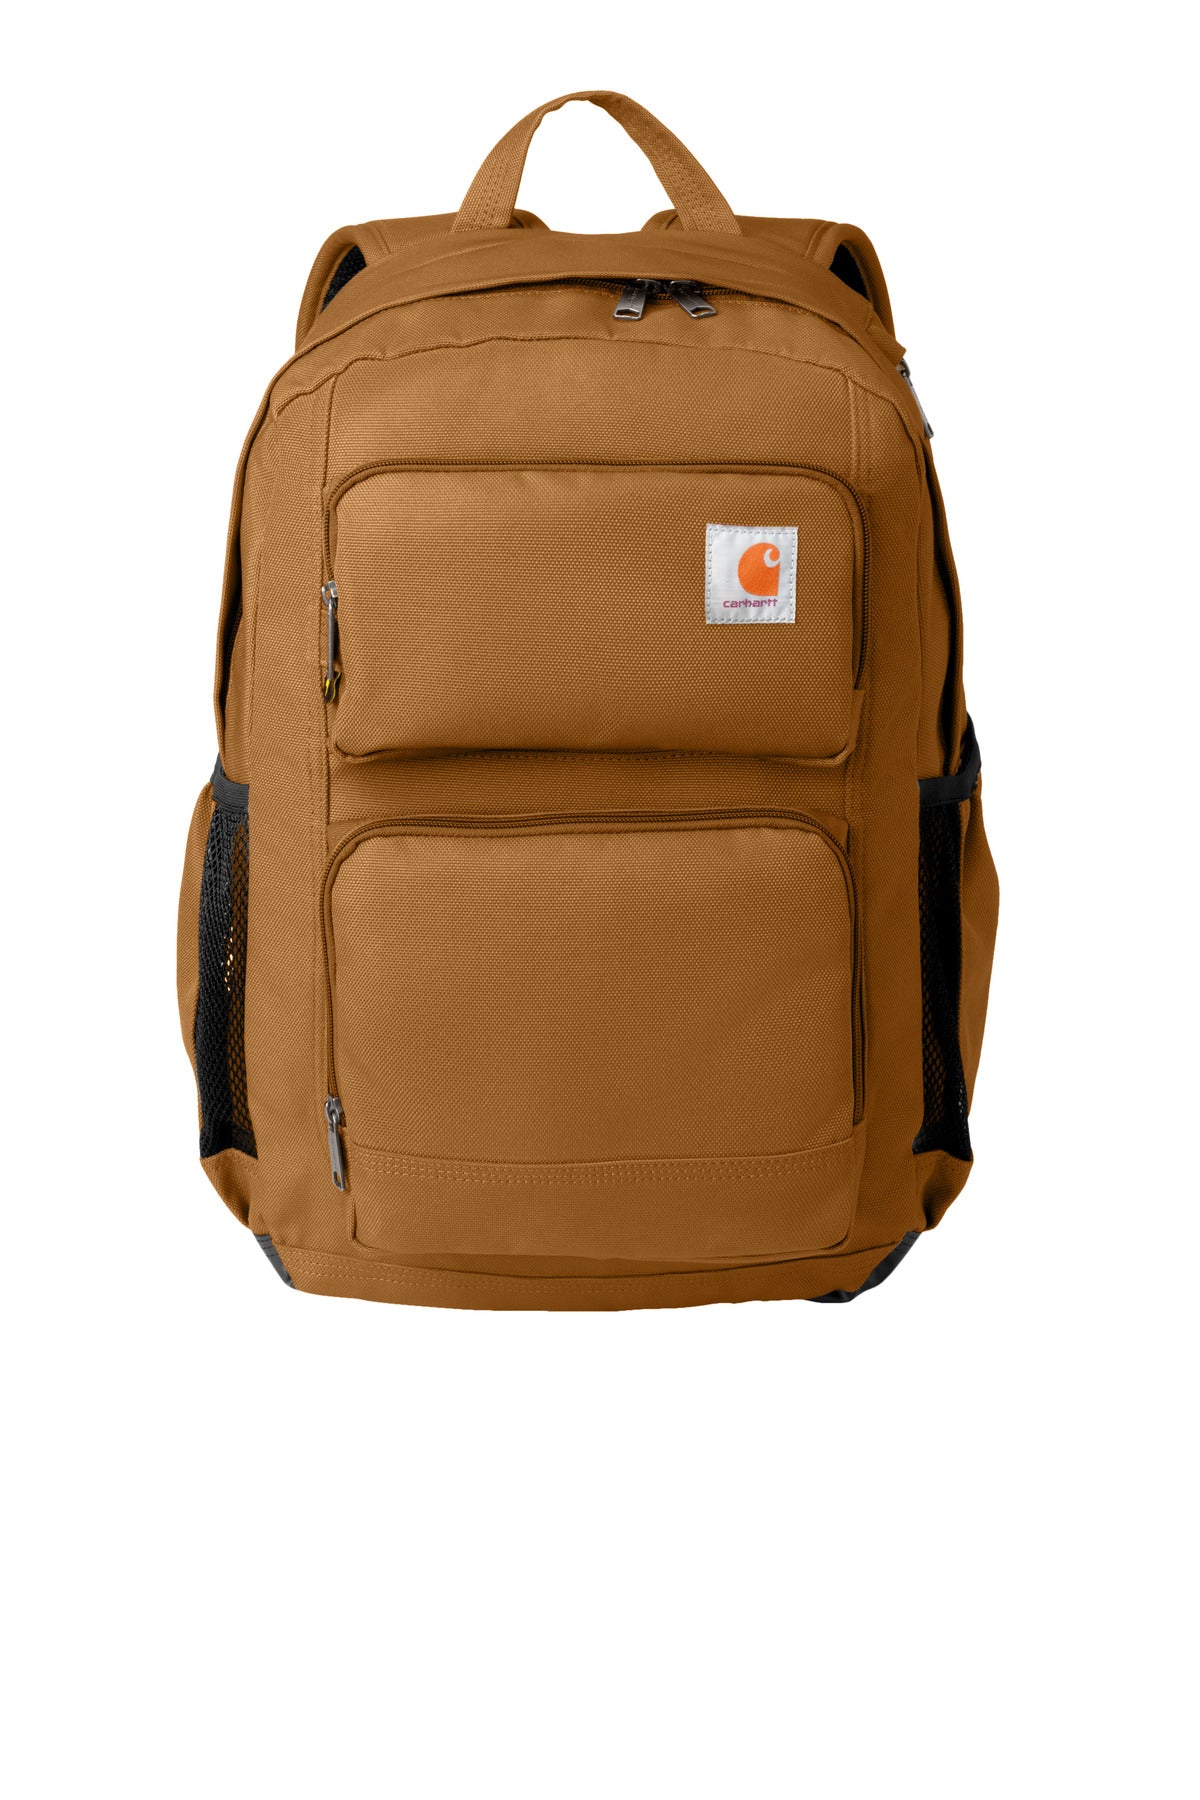 Carhartt® 28L Foundry Series Dual-Compartment Backpack CTB0000486